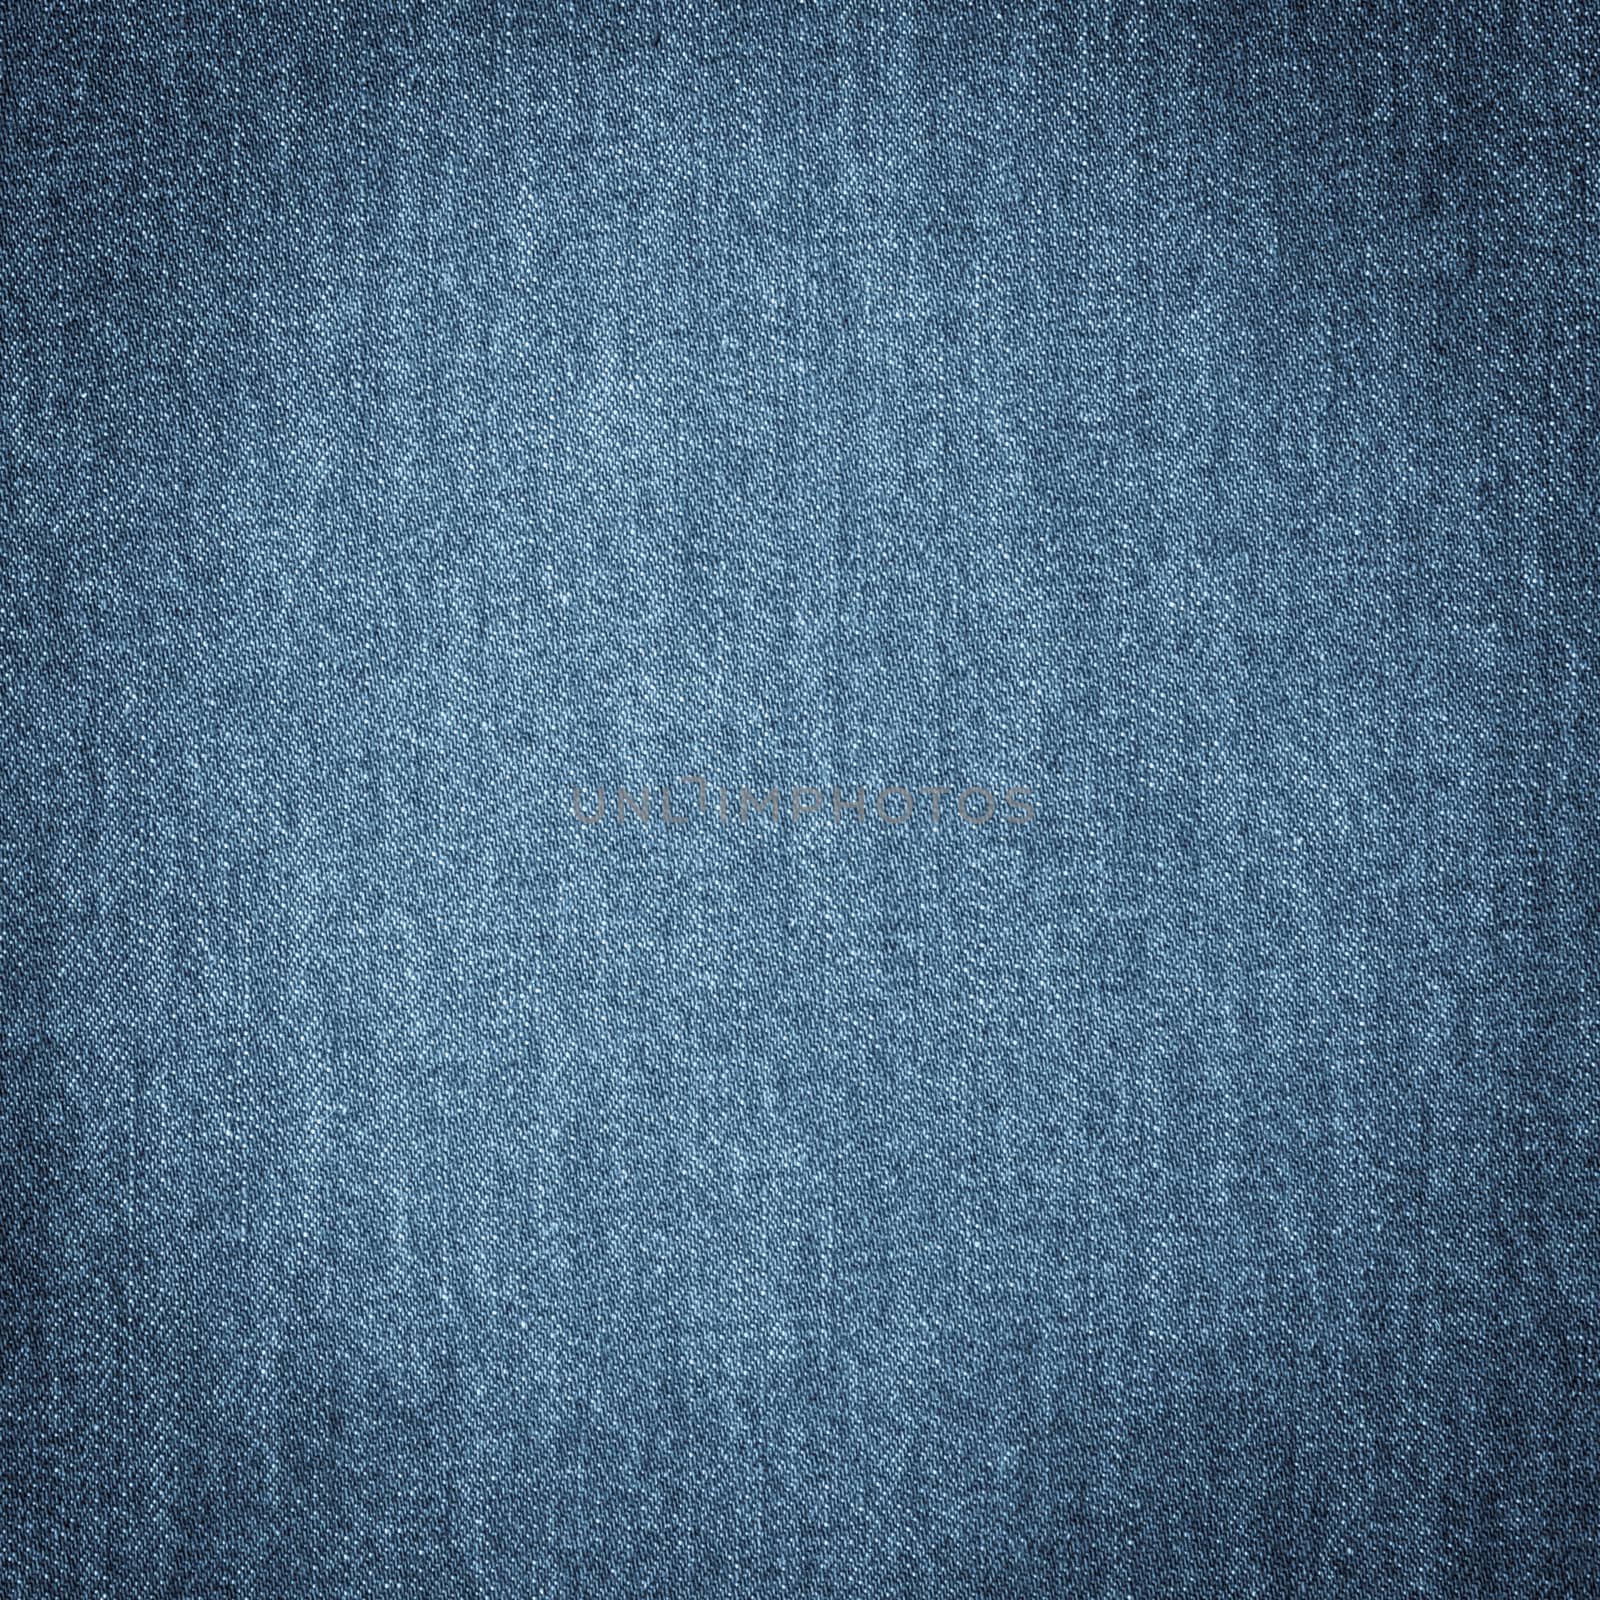 Texture of jeans by oksix